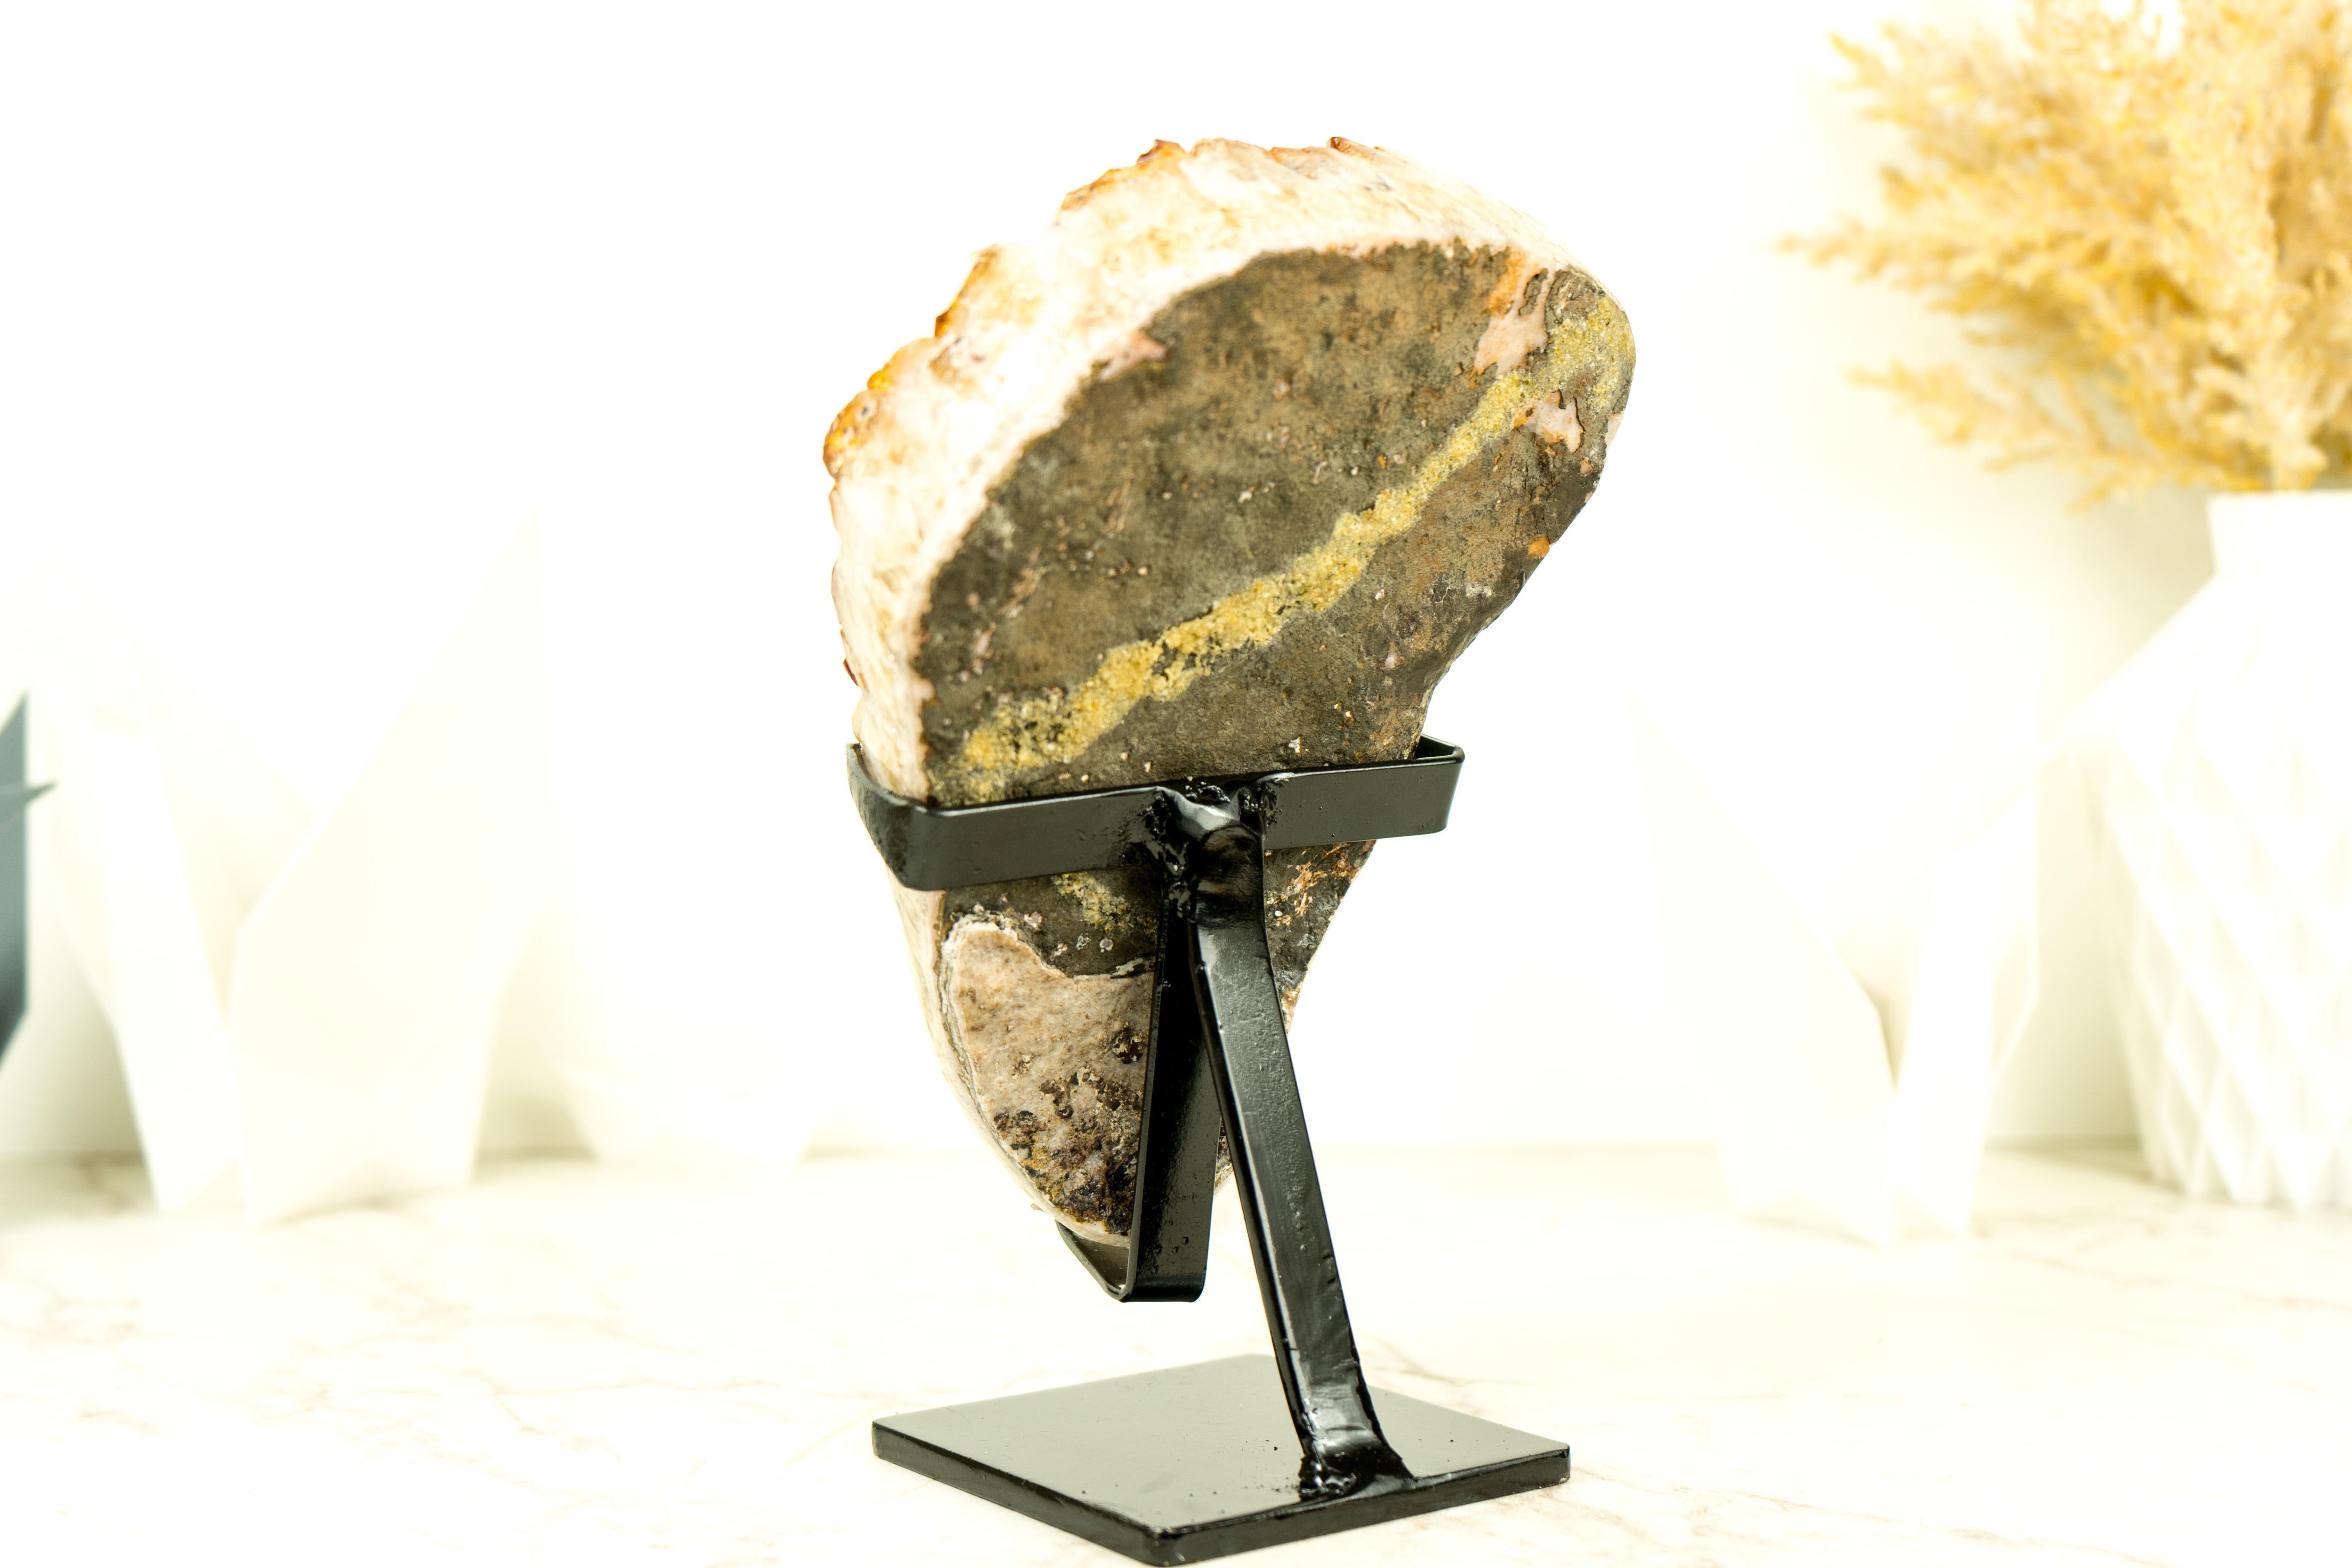 With gorgeous aesthetics, Large AAA Citrine Druzy, and many more special qualities, this citrine cluster is ready to be the conversation starter in your collection or the item to bring fantastic energies to your room decor.

The citrine druzy is the